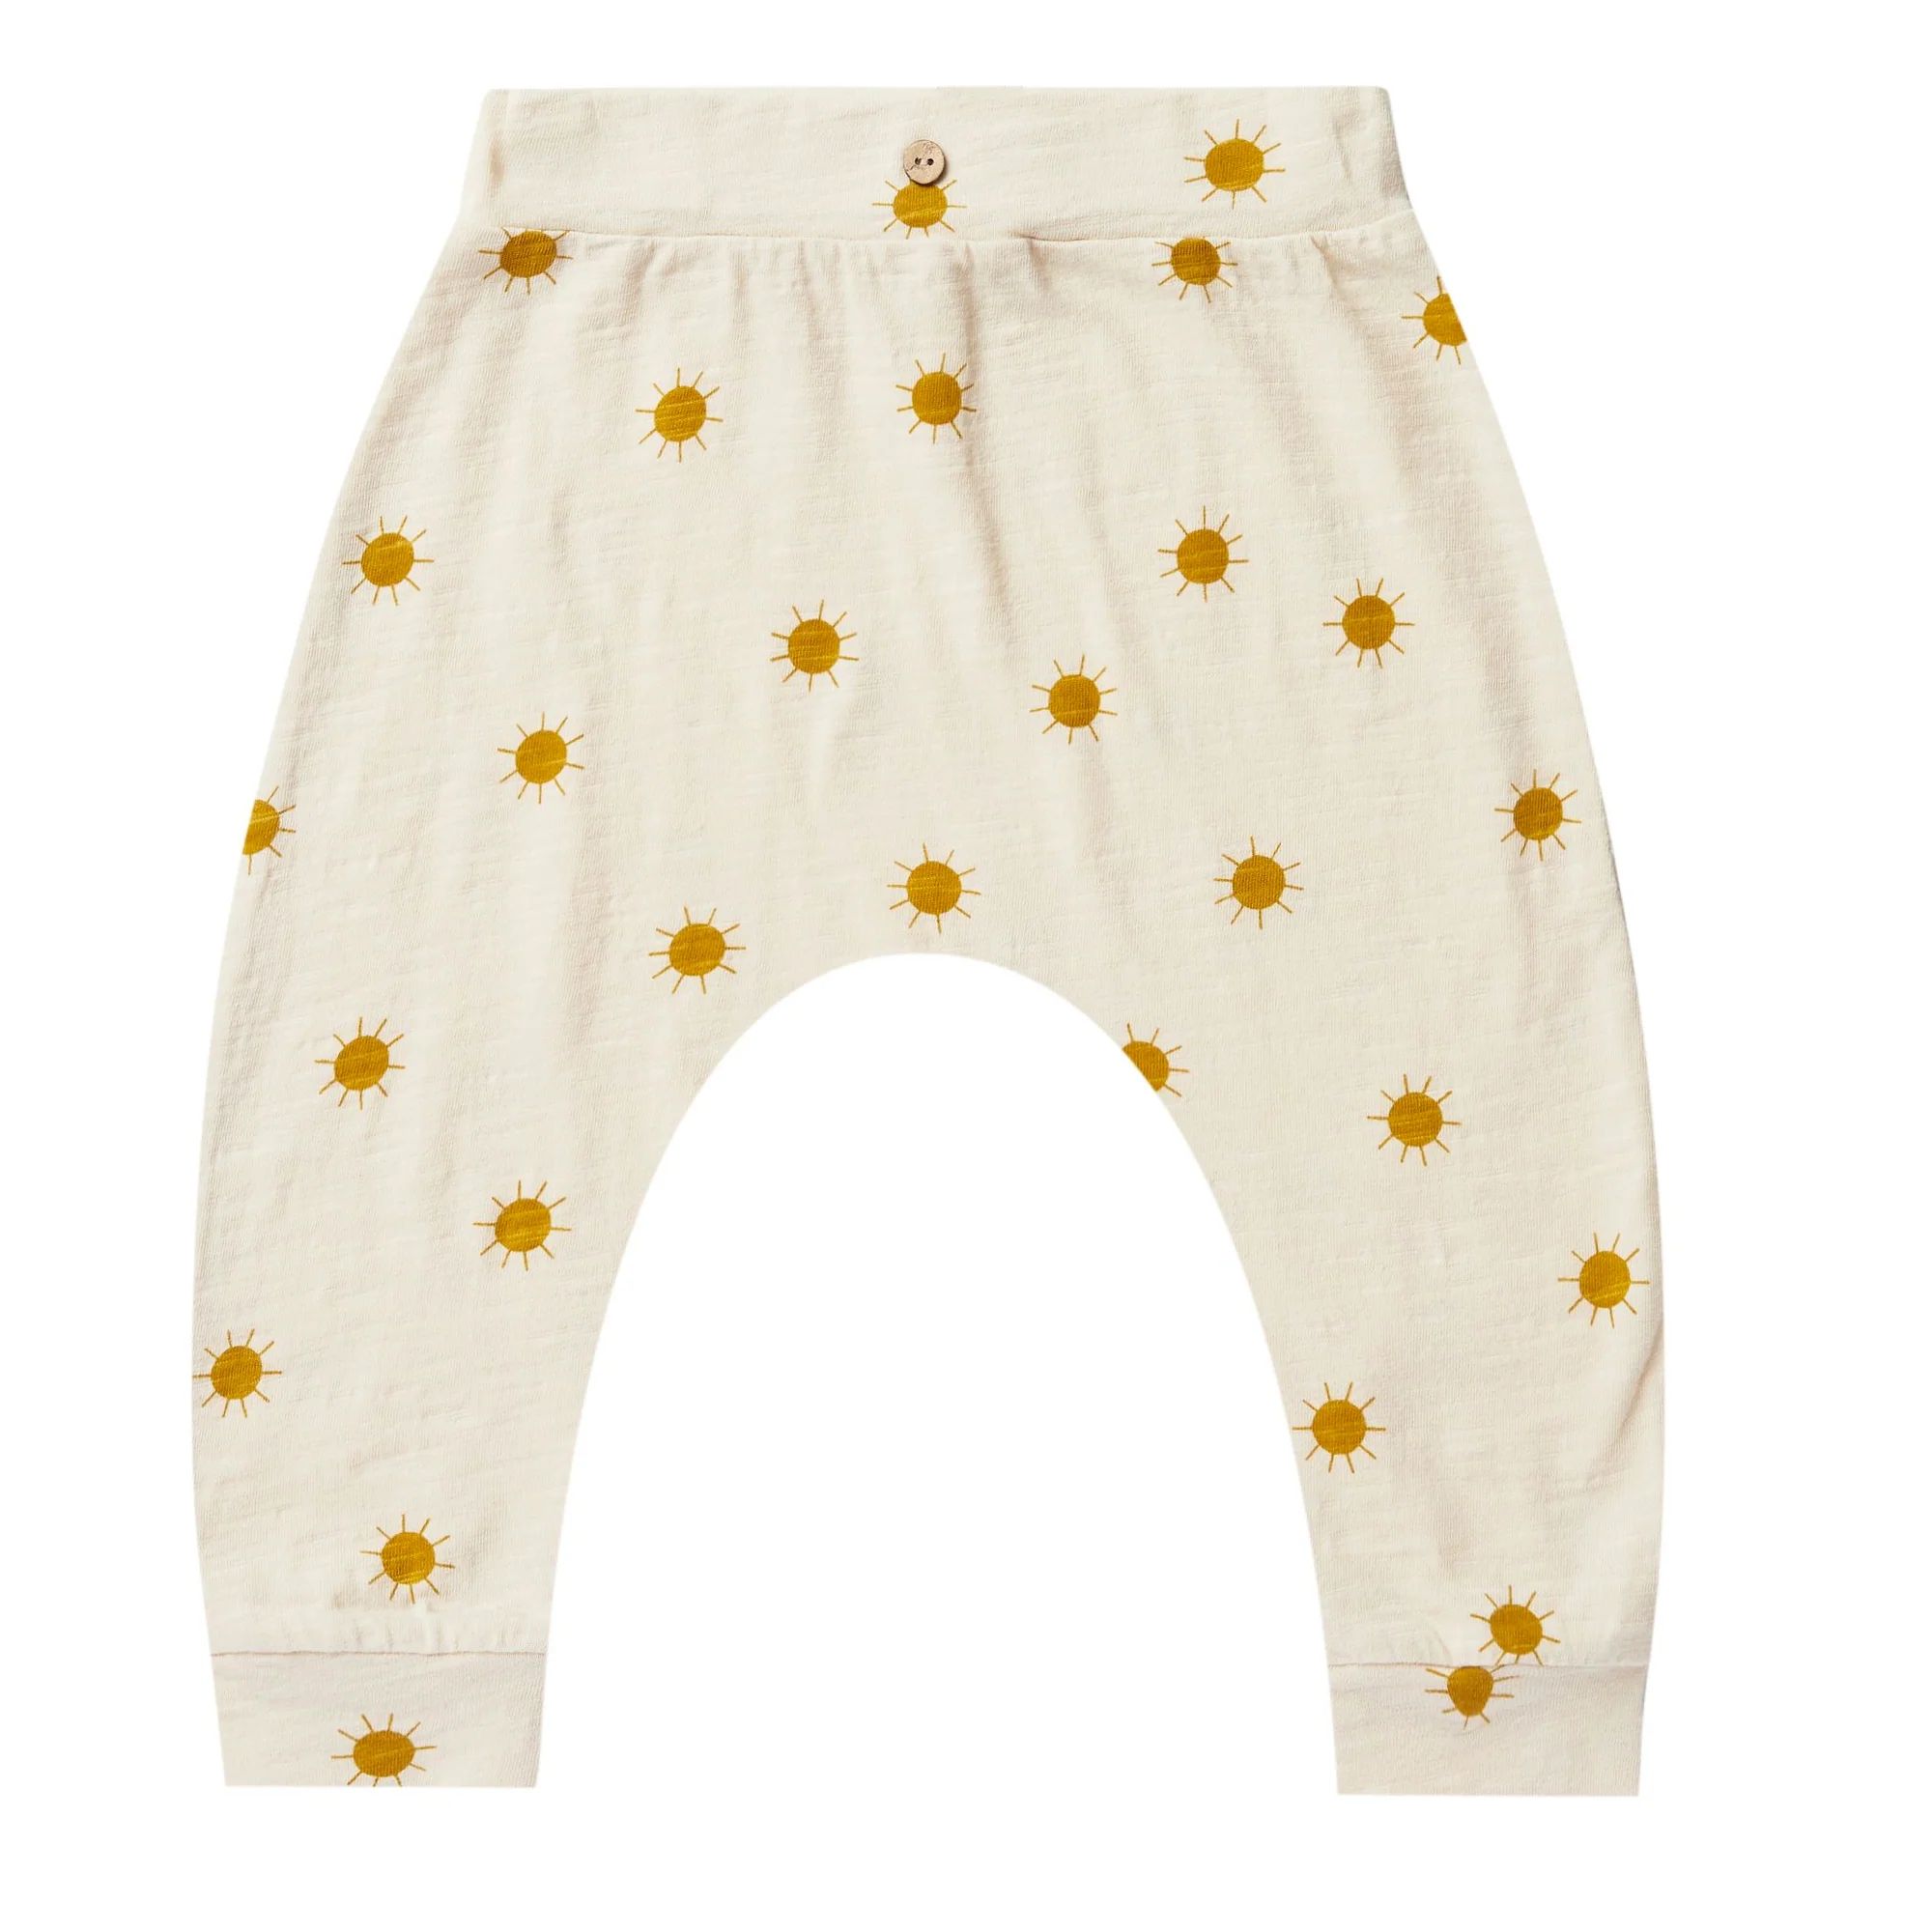 Rylee & Cru Slouch Pant, Natural Suns | SpearmintLOVE